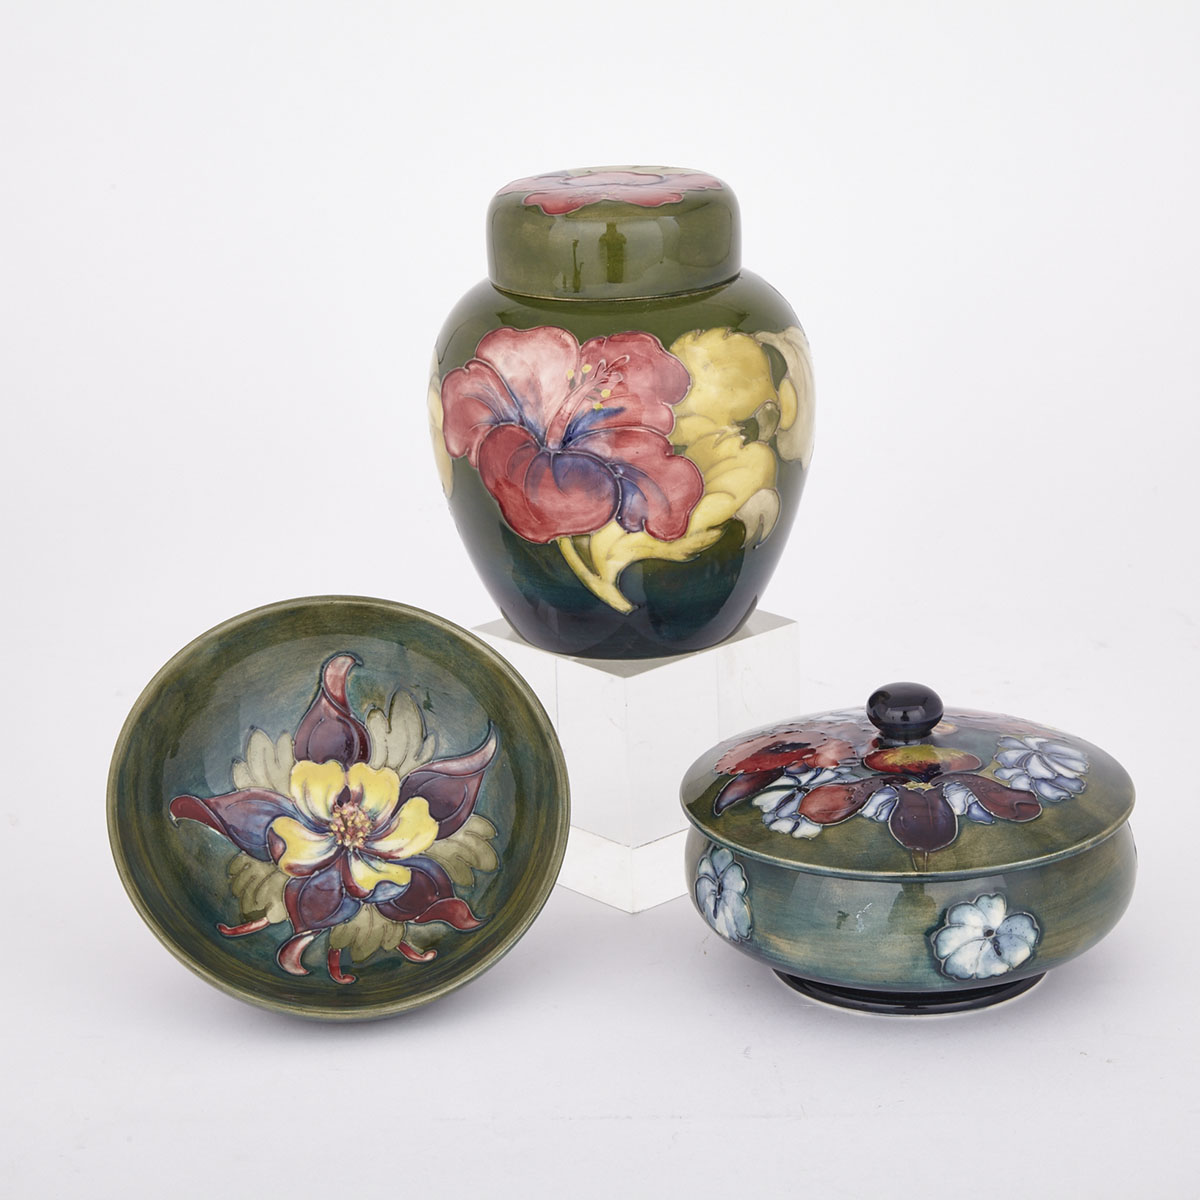 Moorcroft Orchids Covered Jar, Hibiscus Ginger Jar and Cover and a Columbine Bowl, 20th century